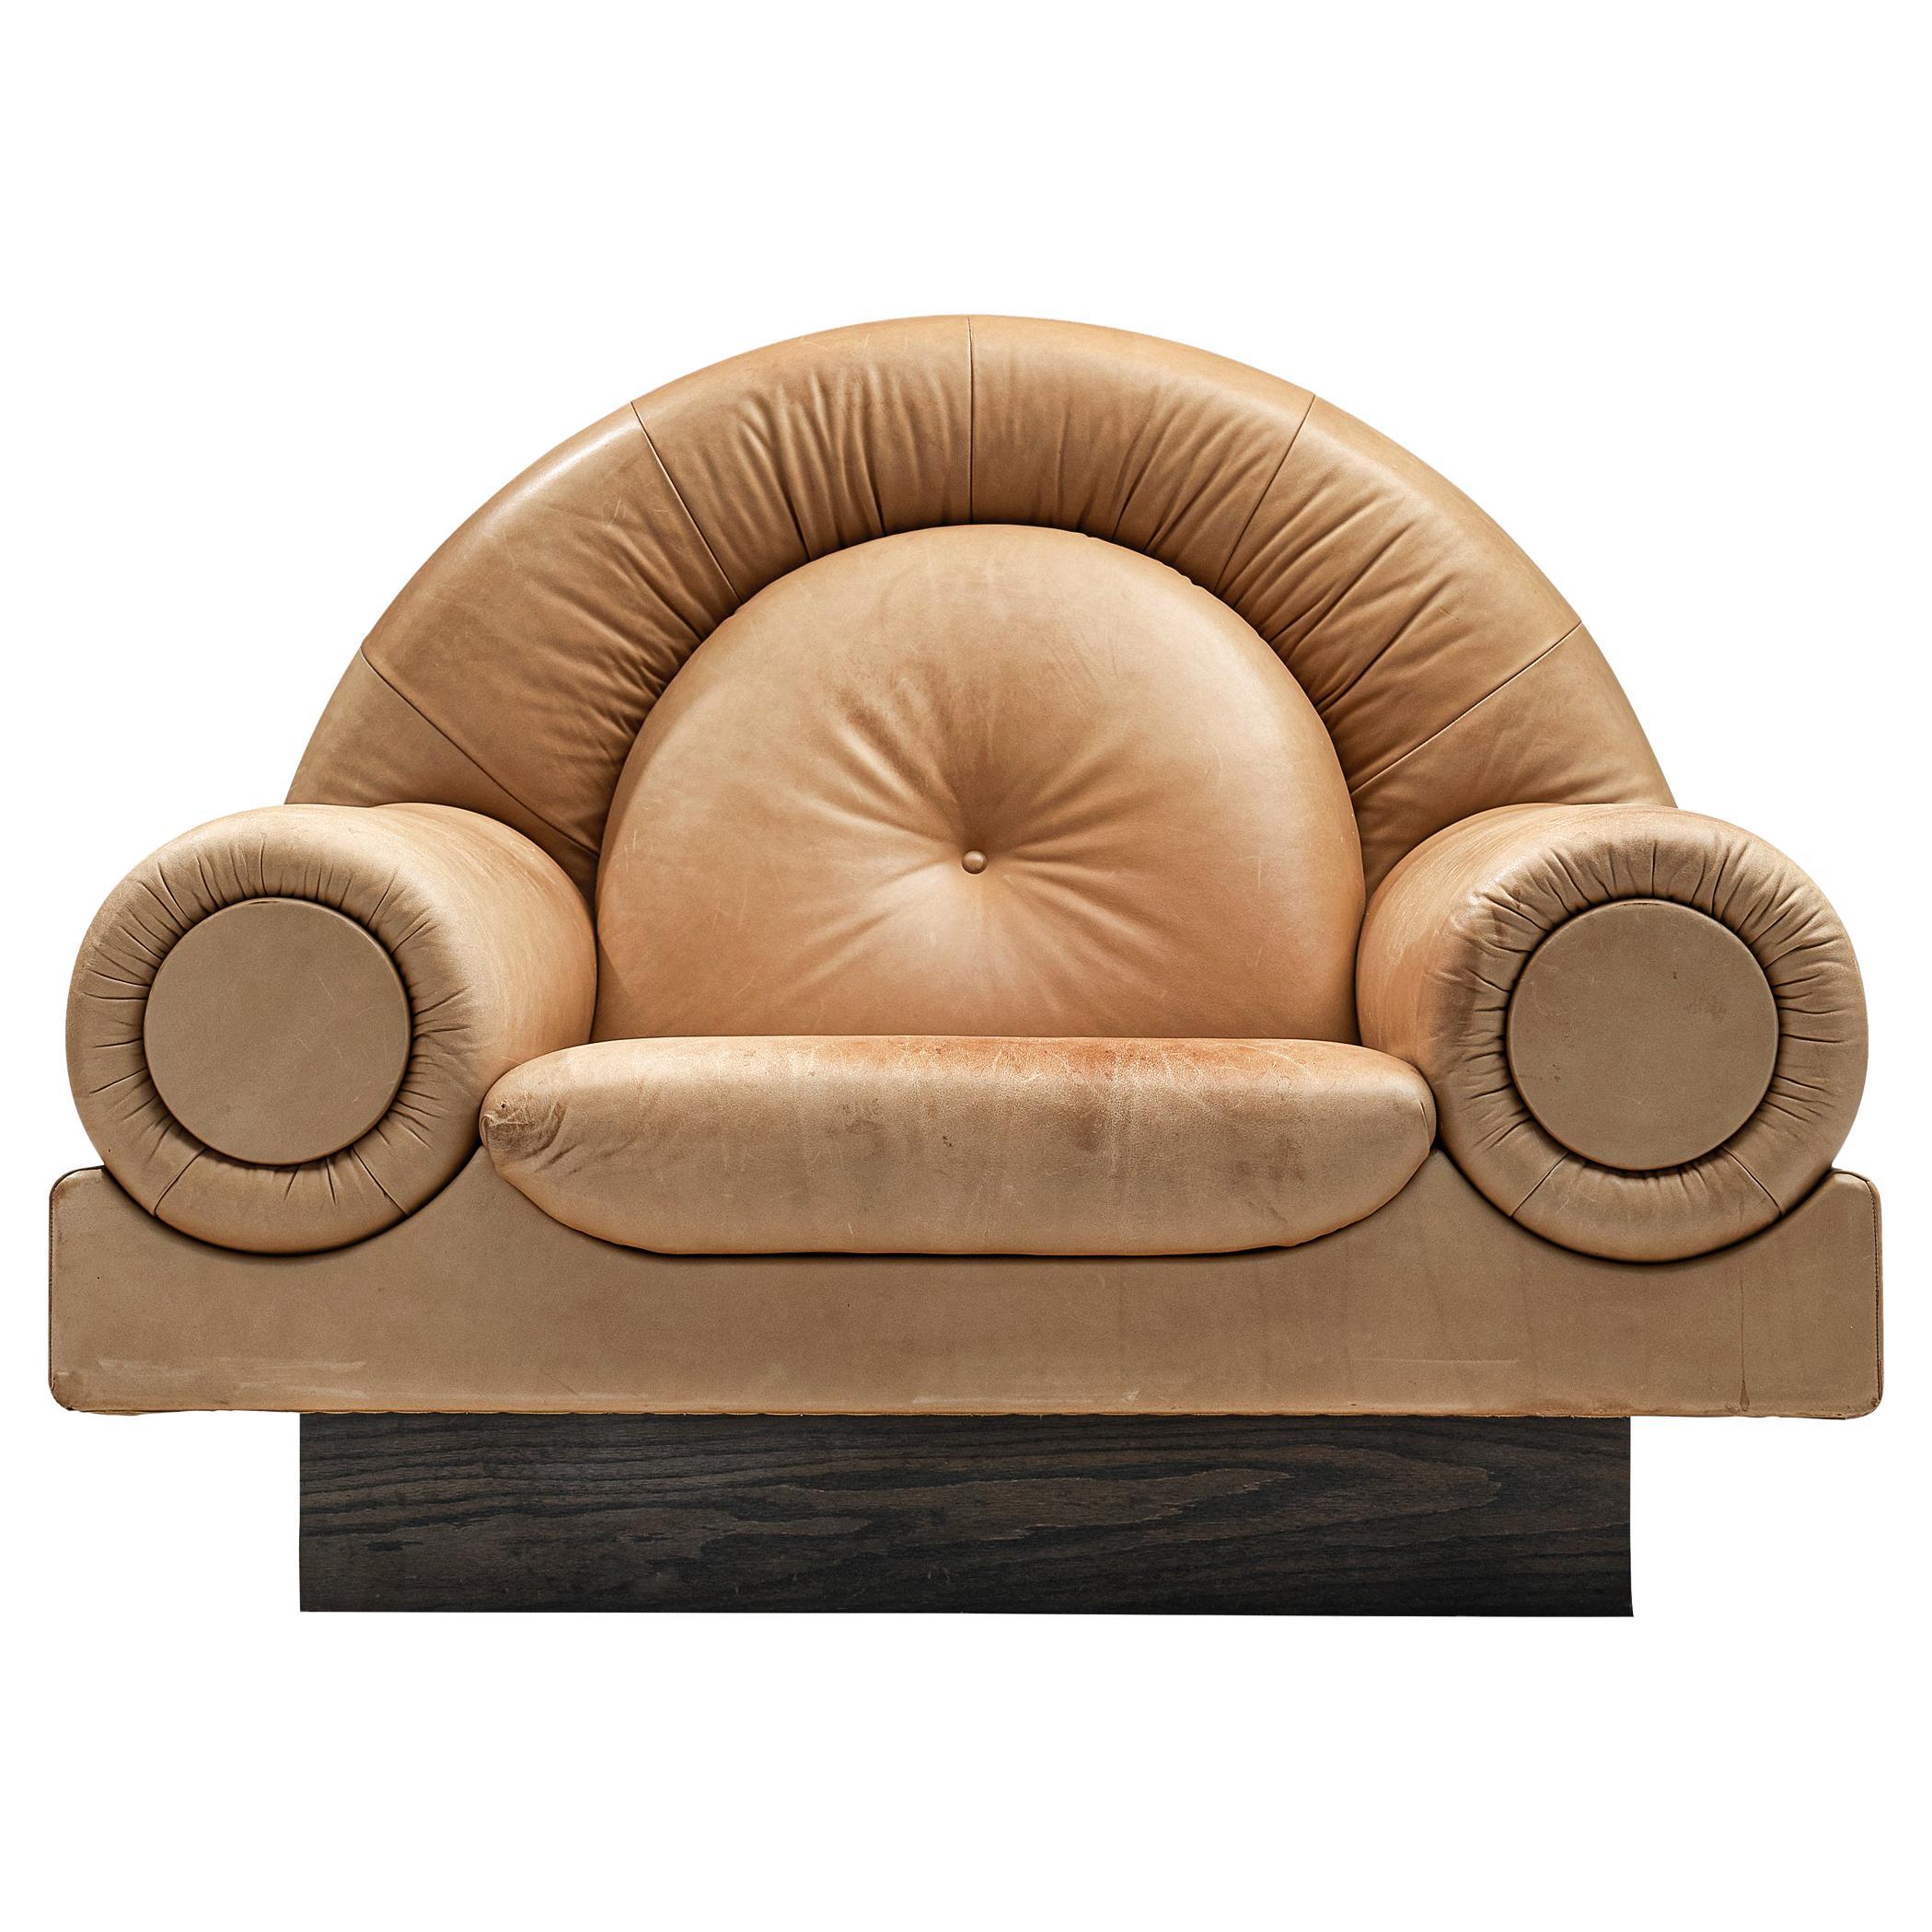 Sculptural Lounge Chair in Beige Leather